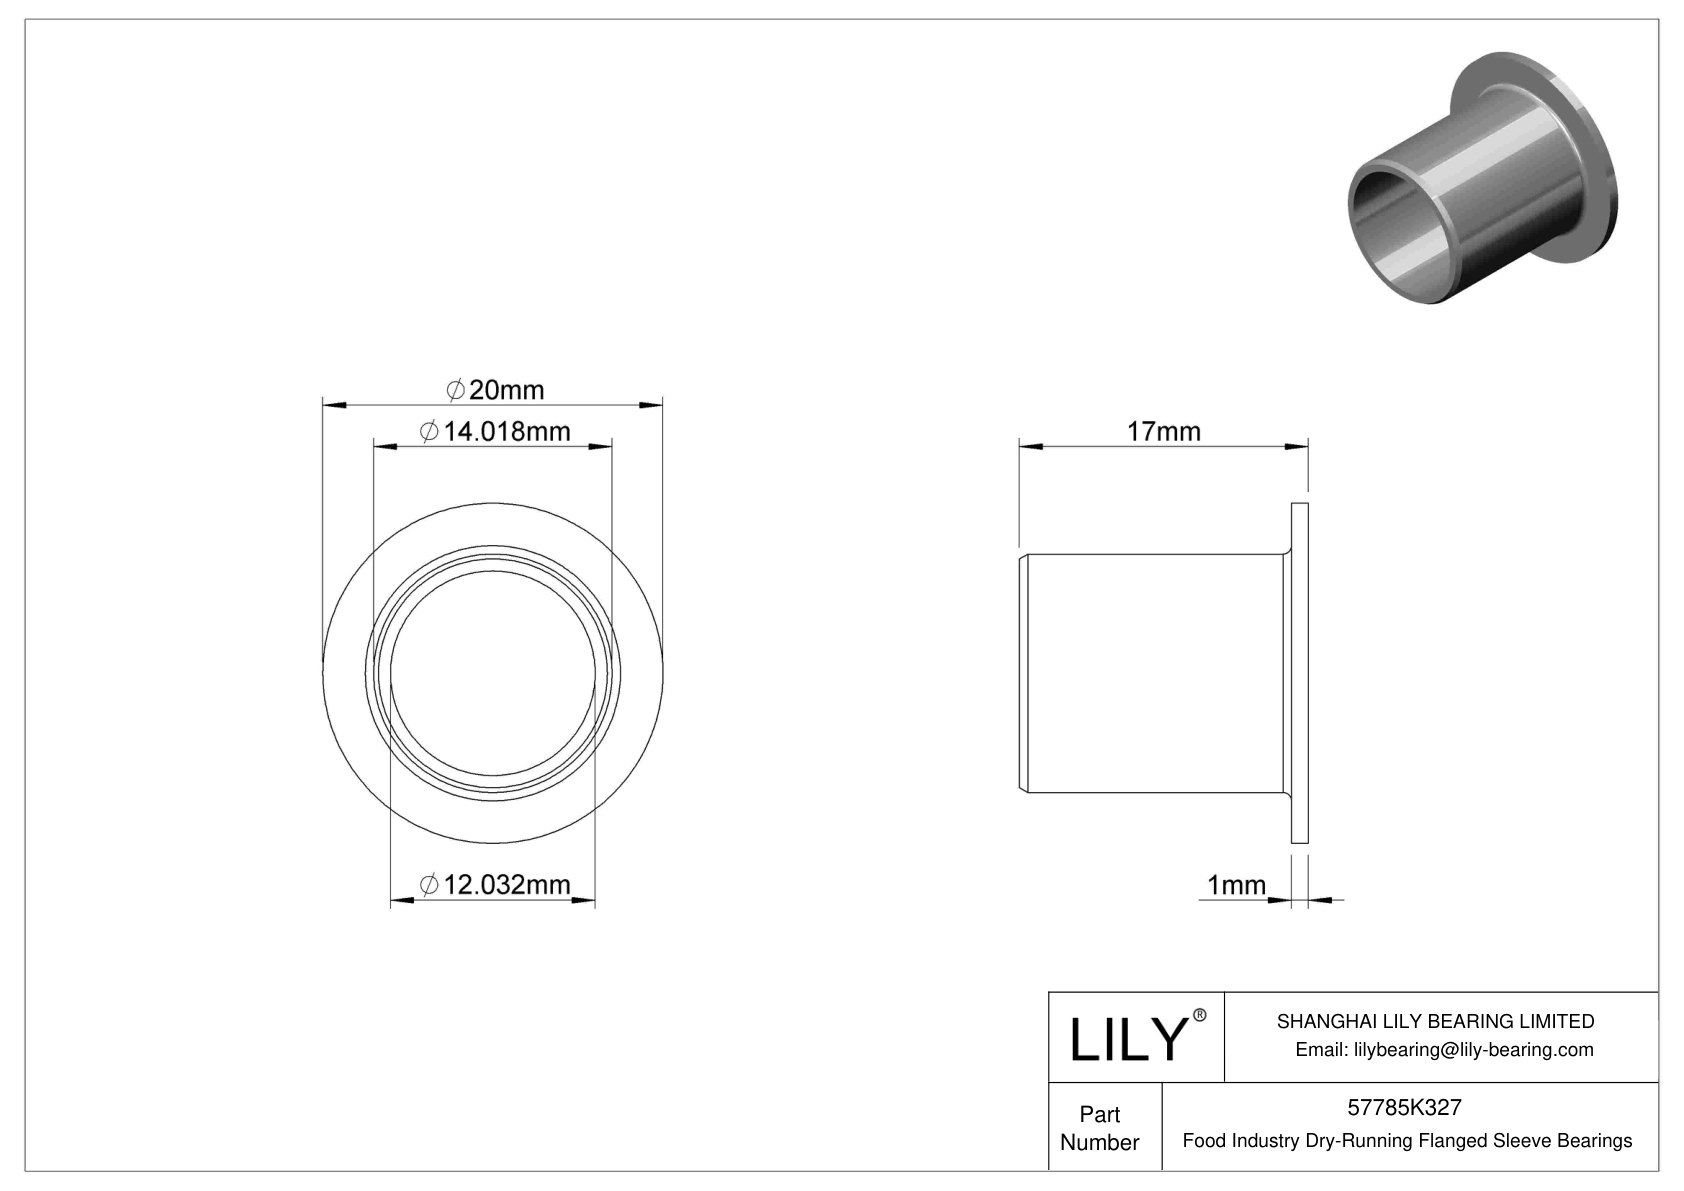 FHHIFKDCH Food Industry Dry-Running Flanged Sleeve Bearings cad drawing